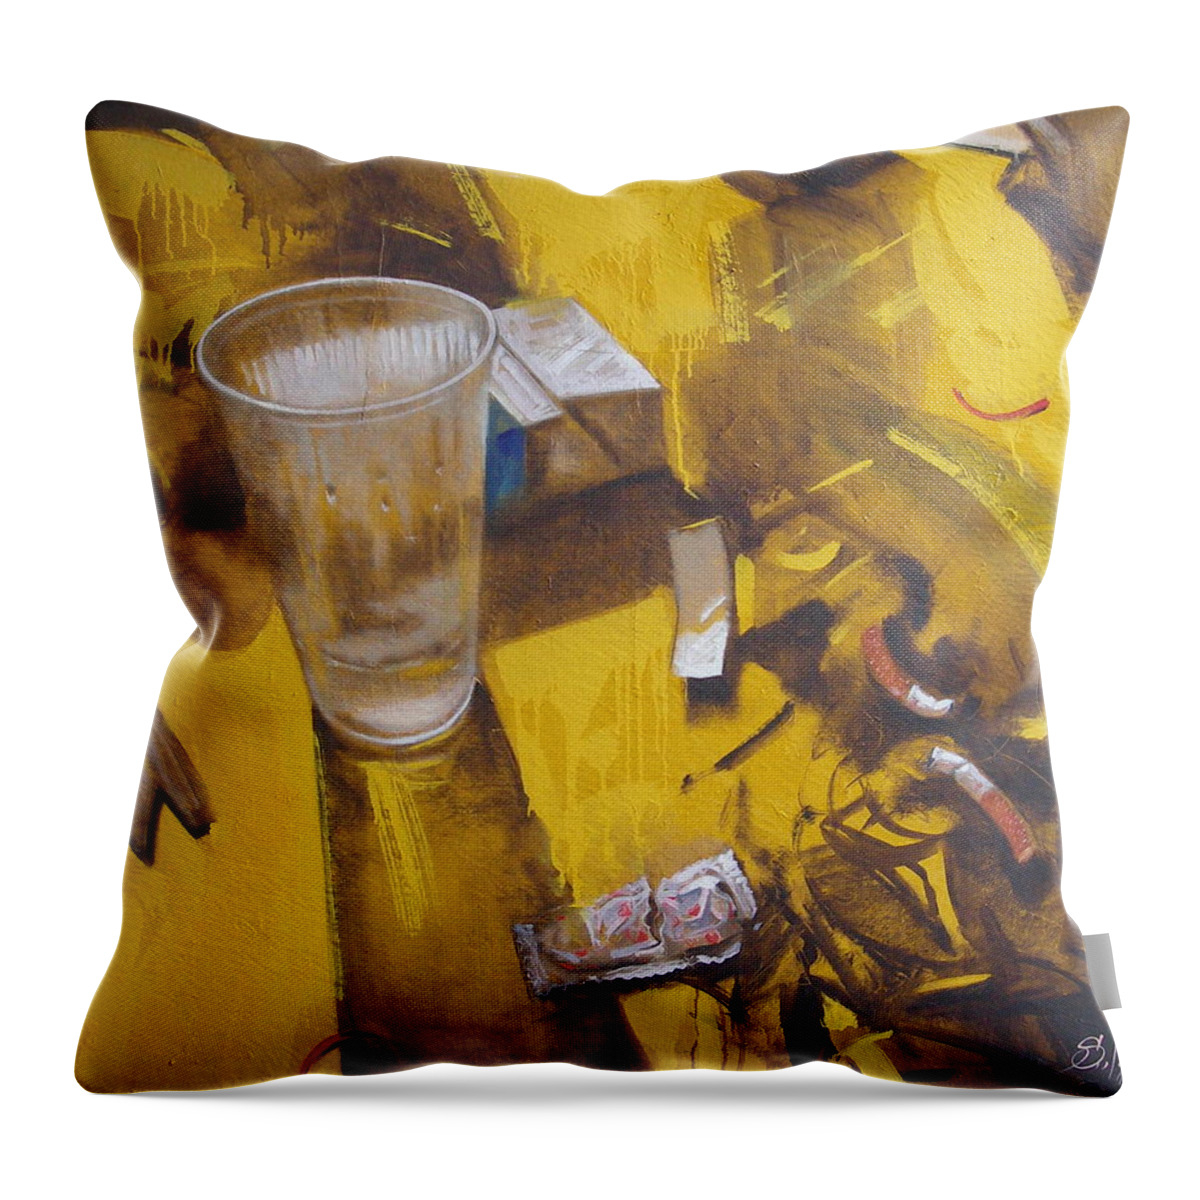 Disposable Throw Pillow featuring the painting Disposable by Sergey Ignatenko